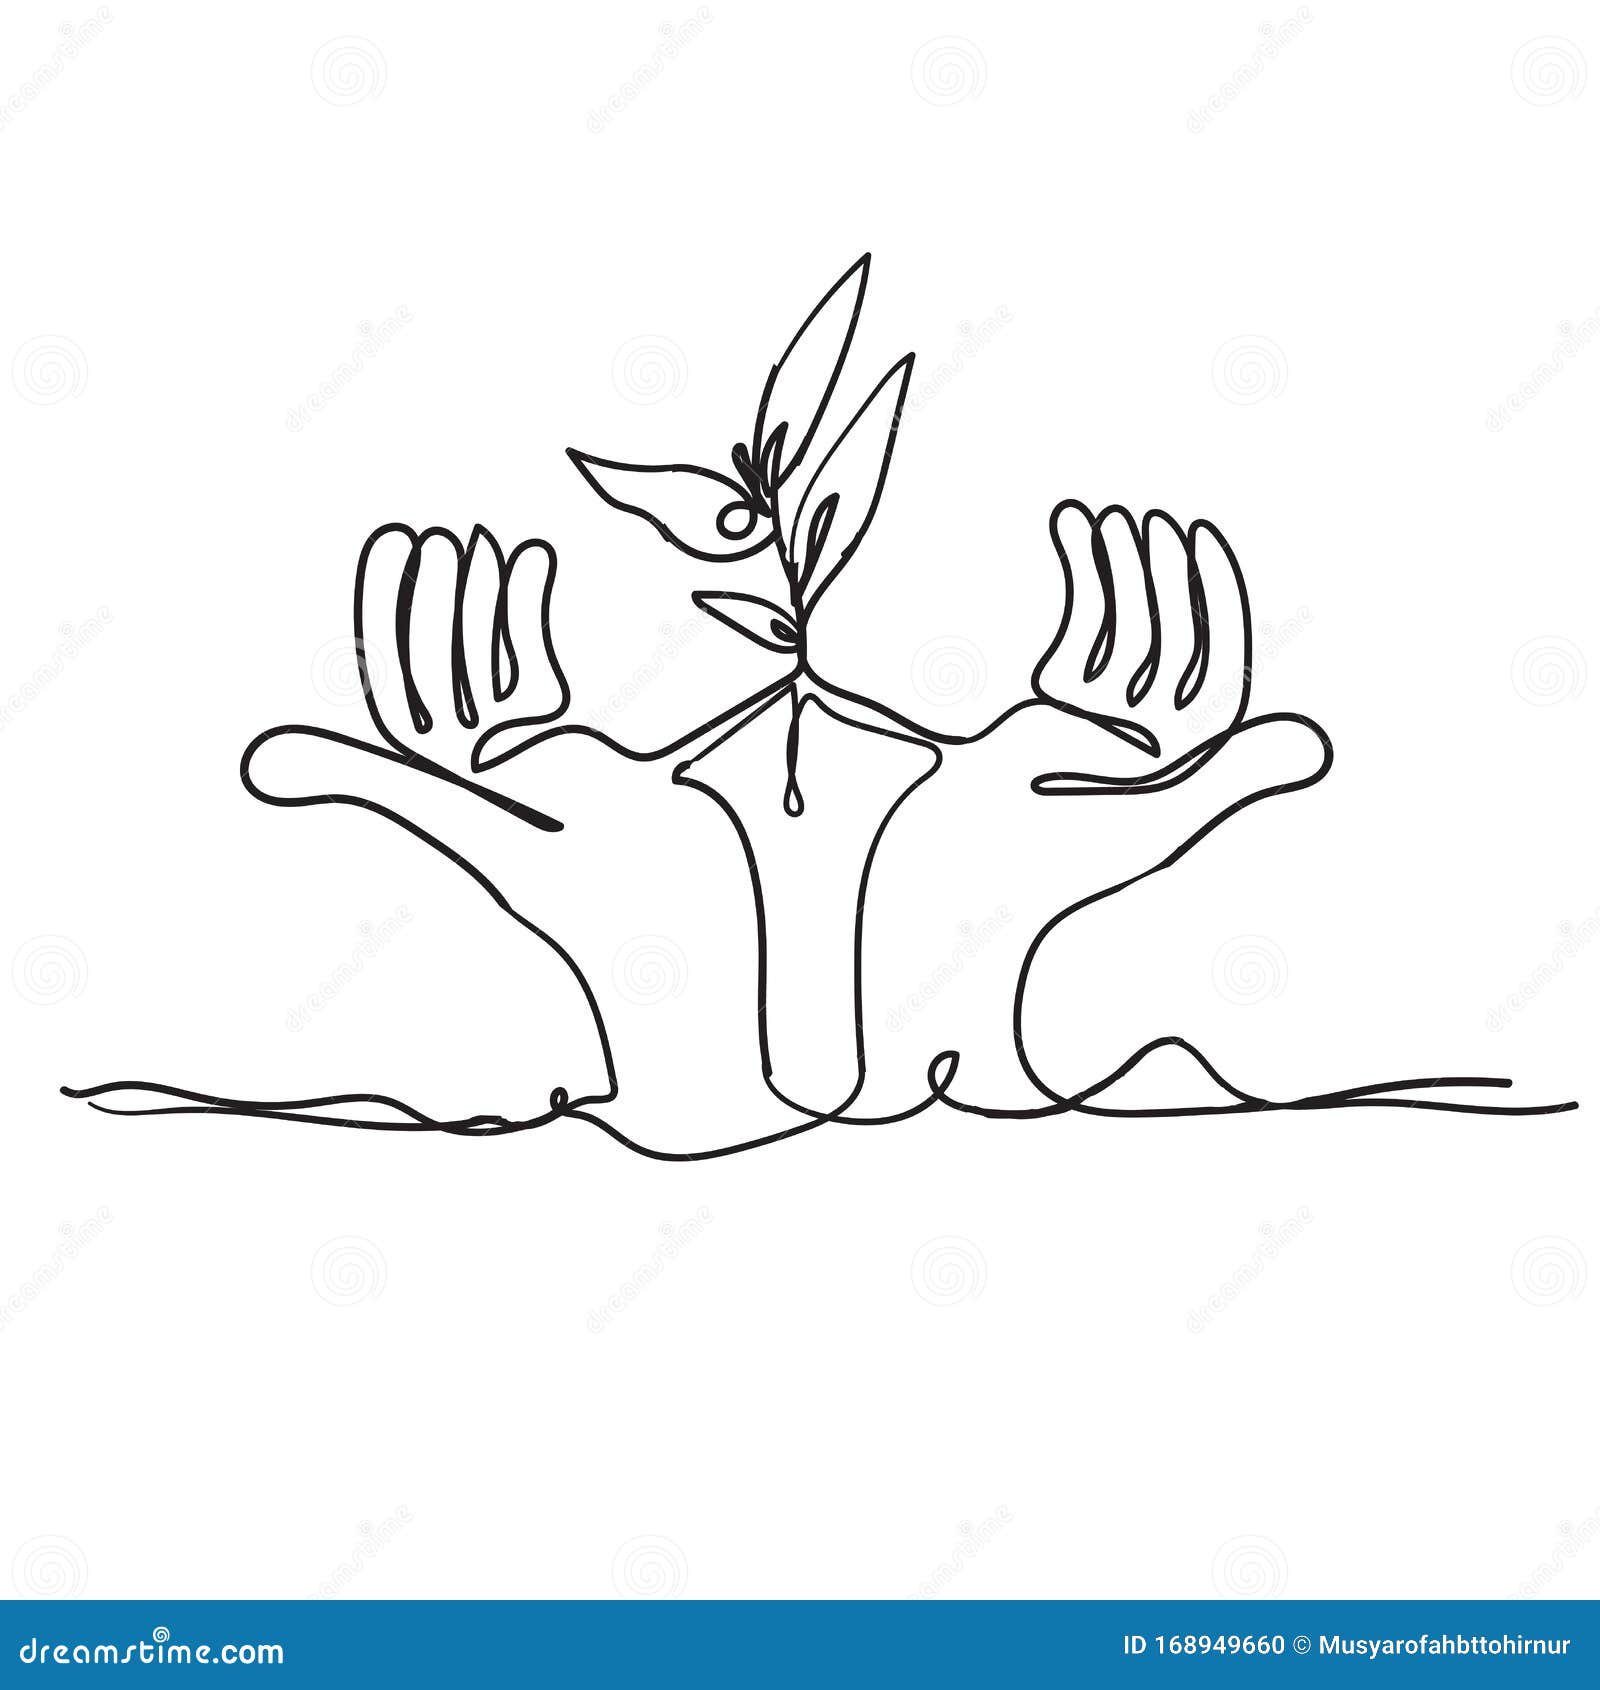 continuous line drawing. hands palms together with growth plant doodle handdrawing style